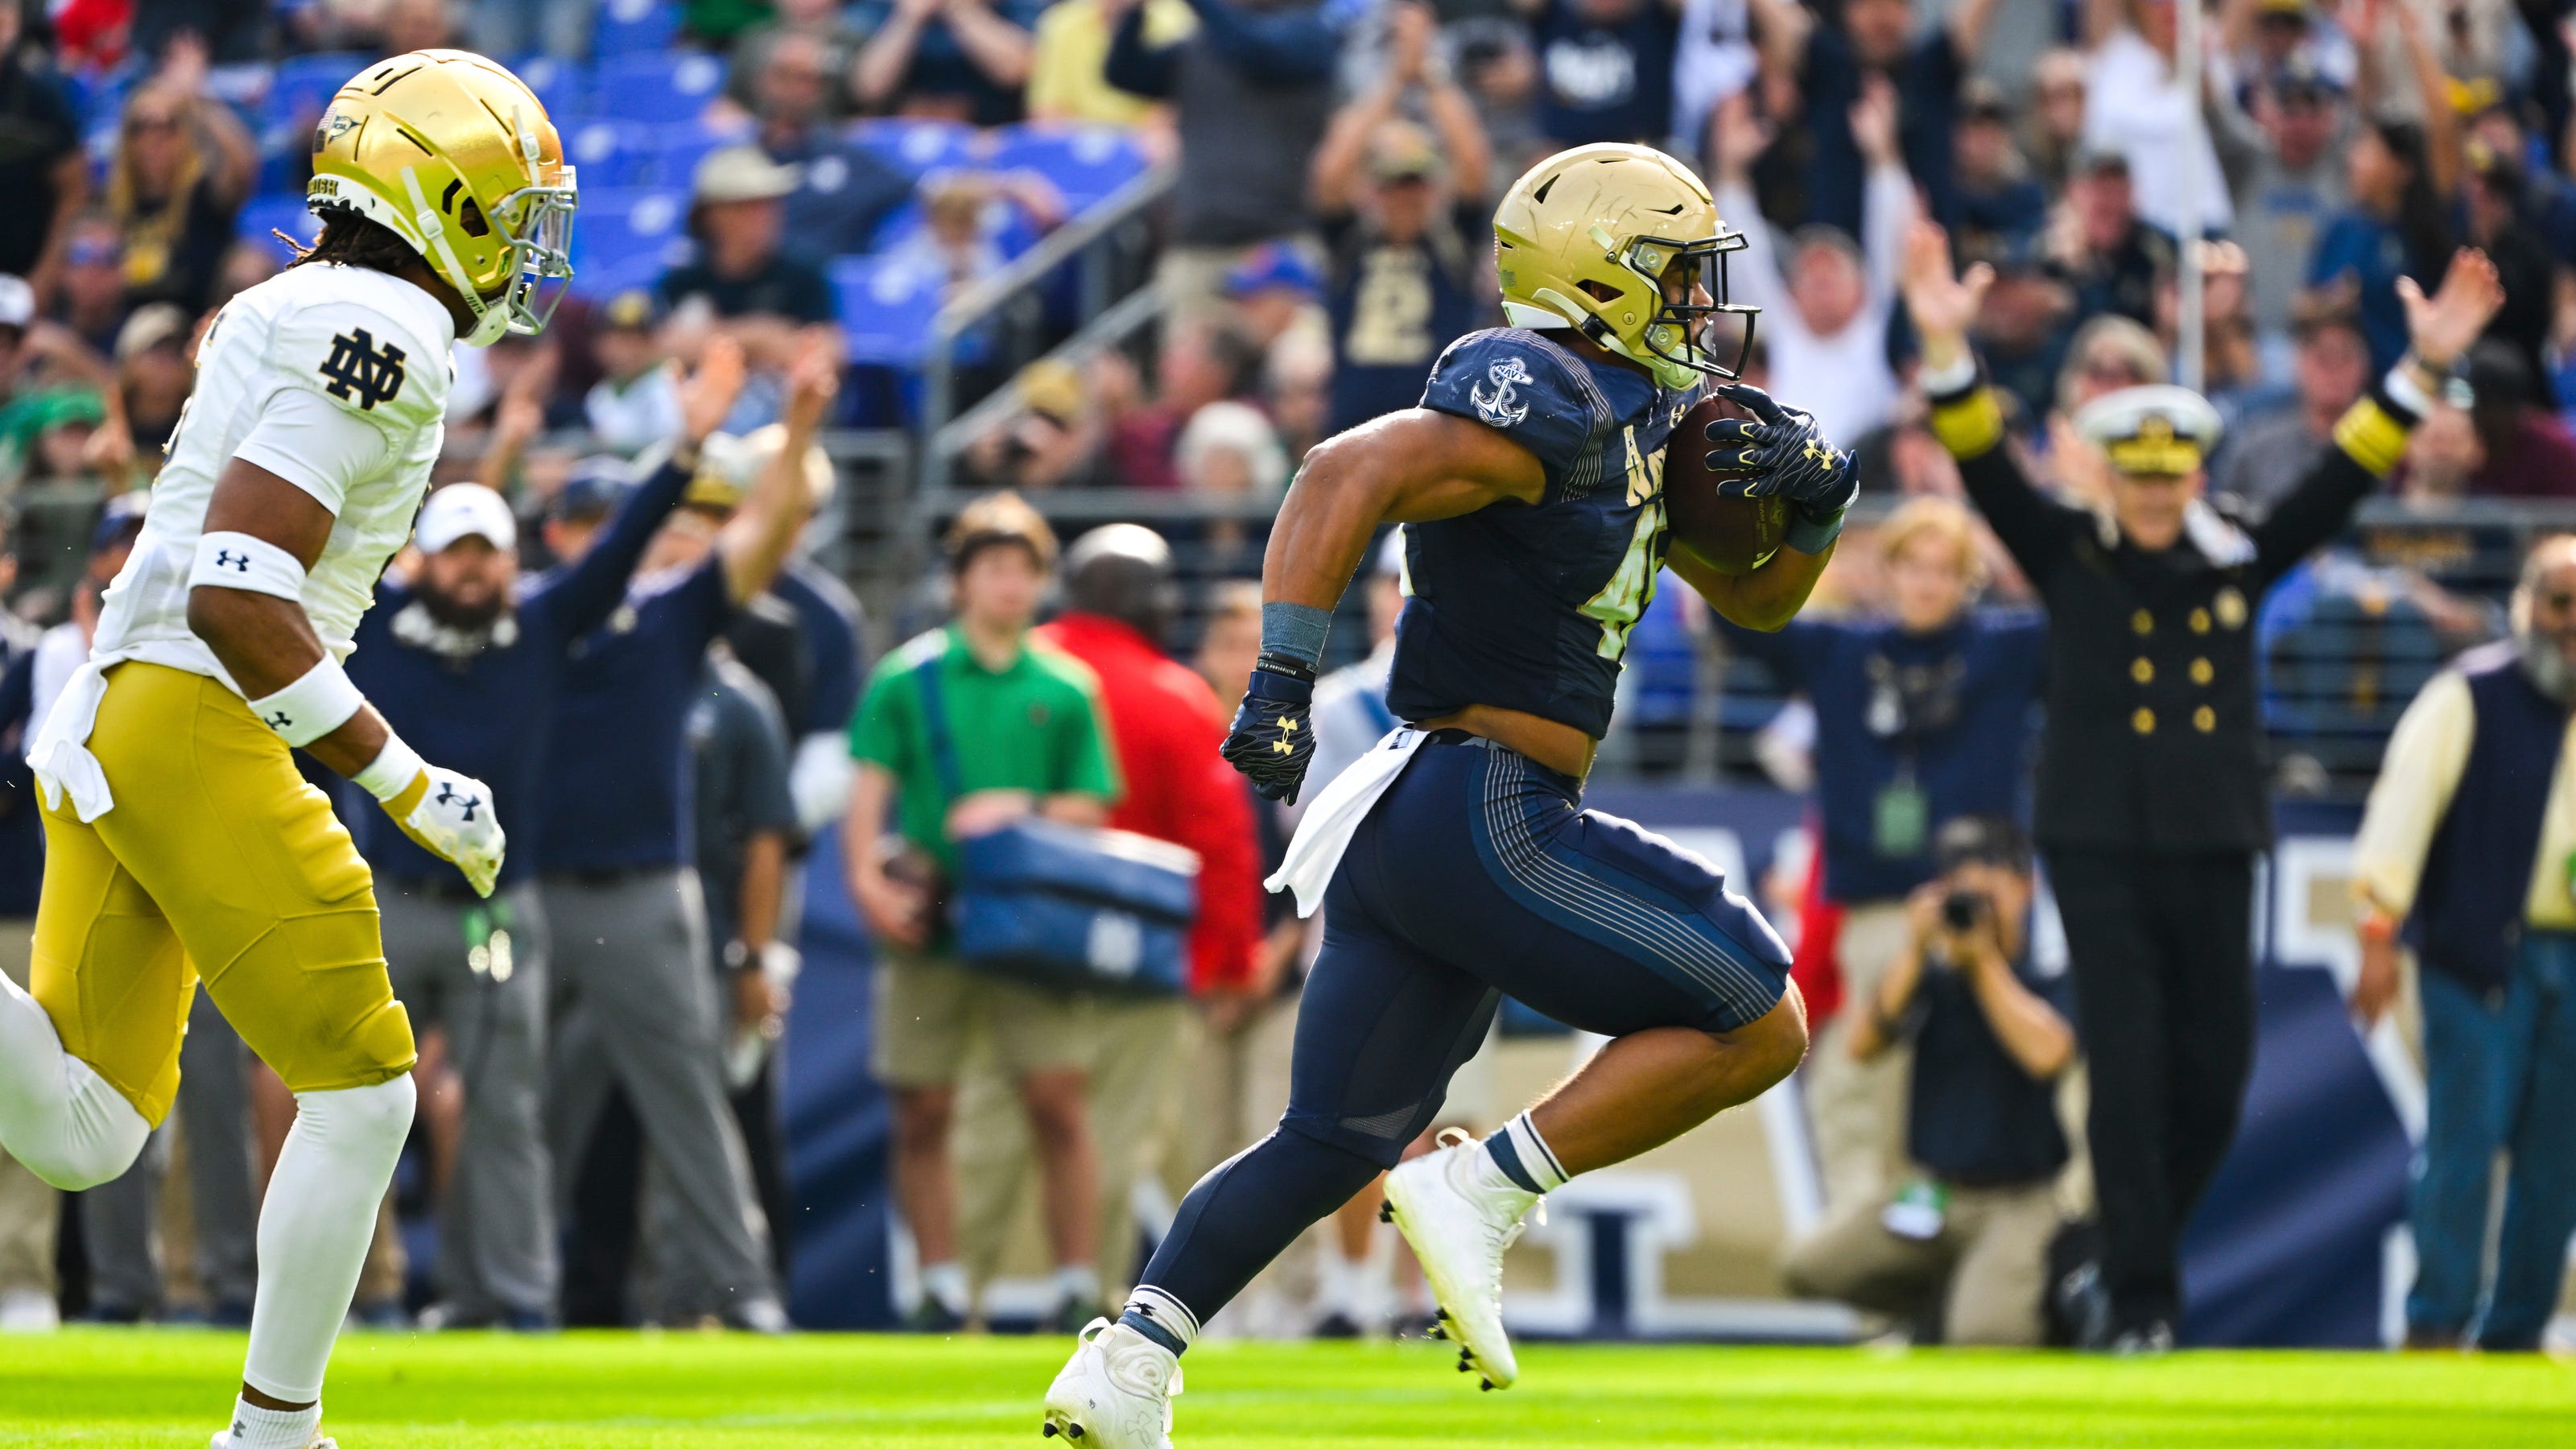 Lenzy makes super catch as No. 20 Notre Dame tops Navy 35-32